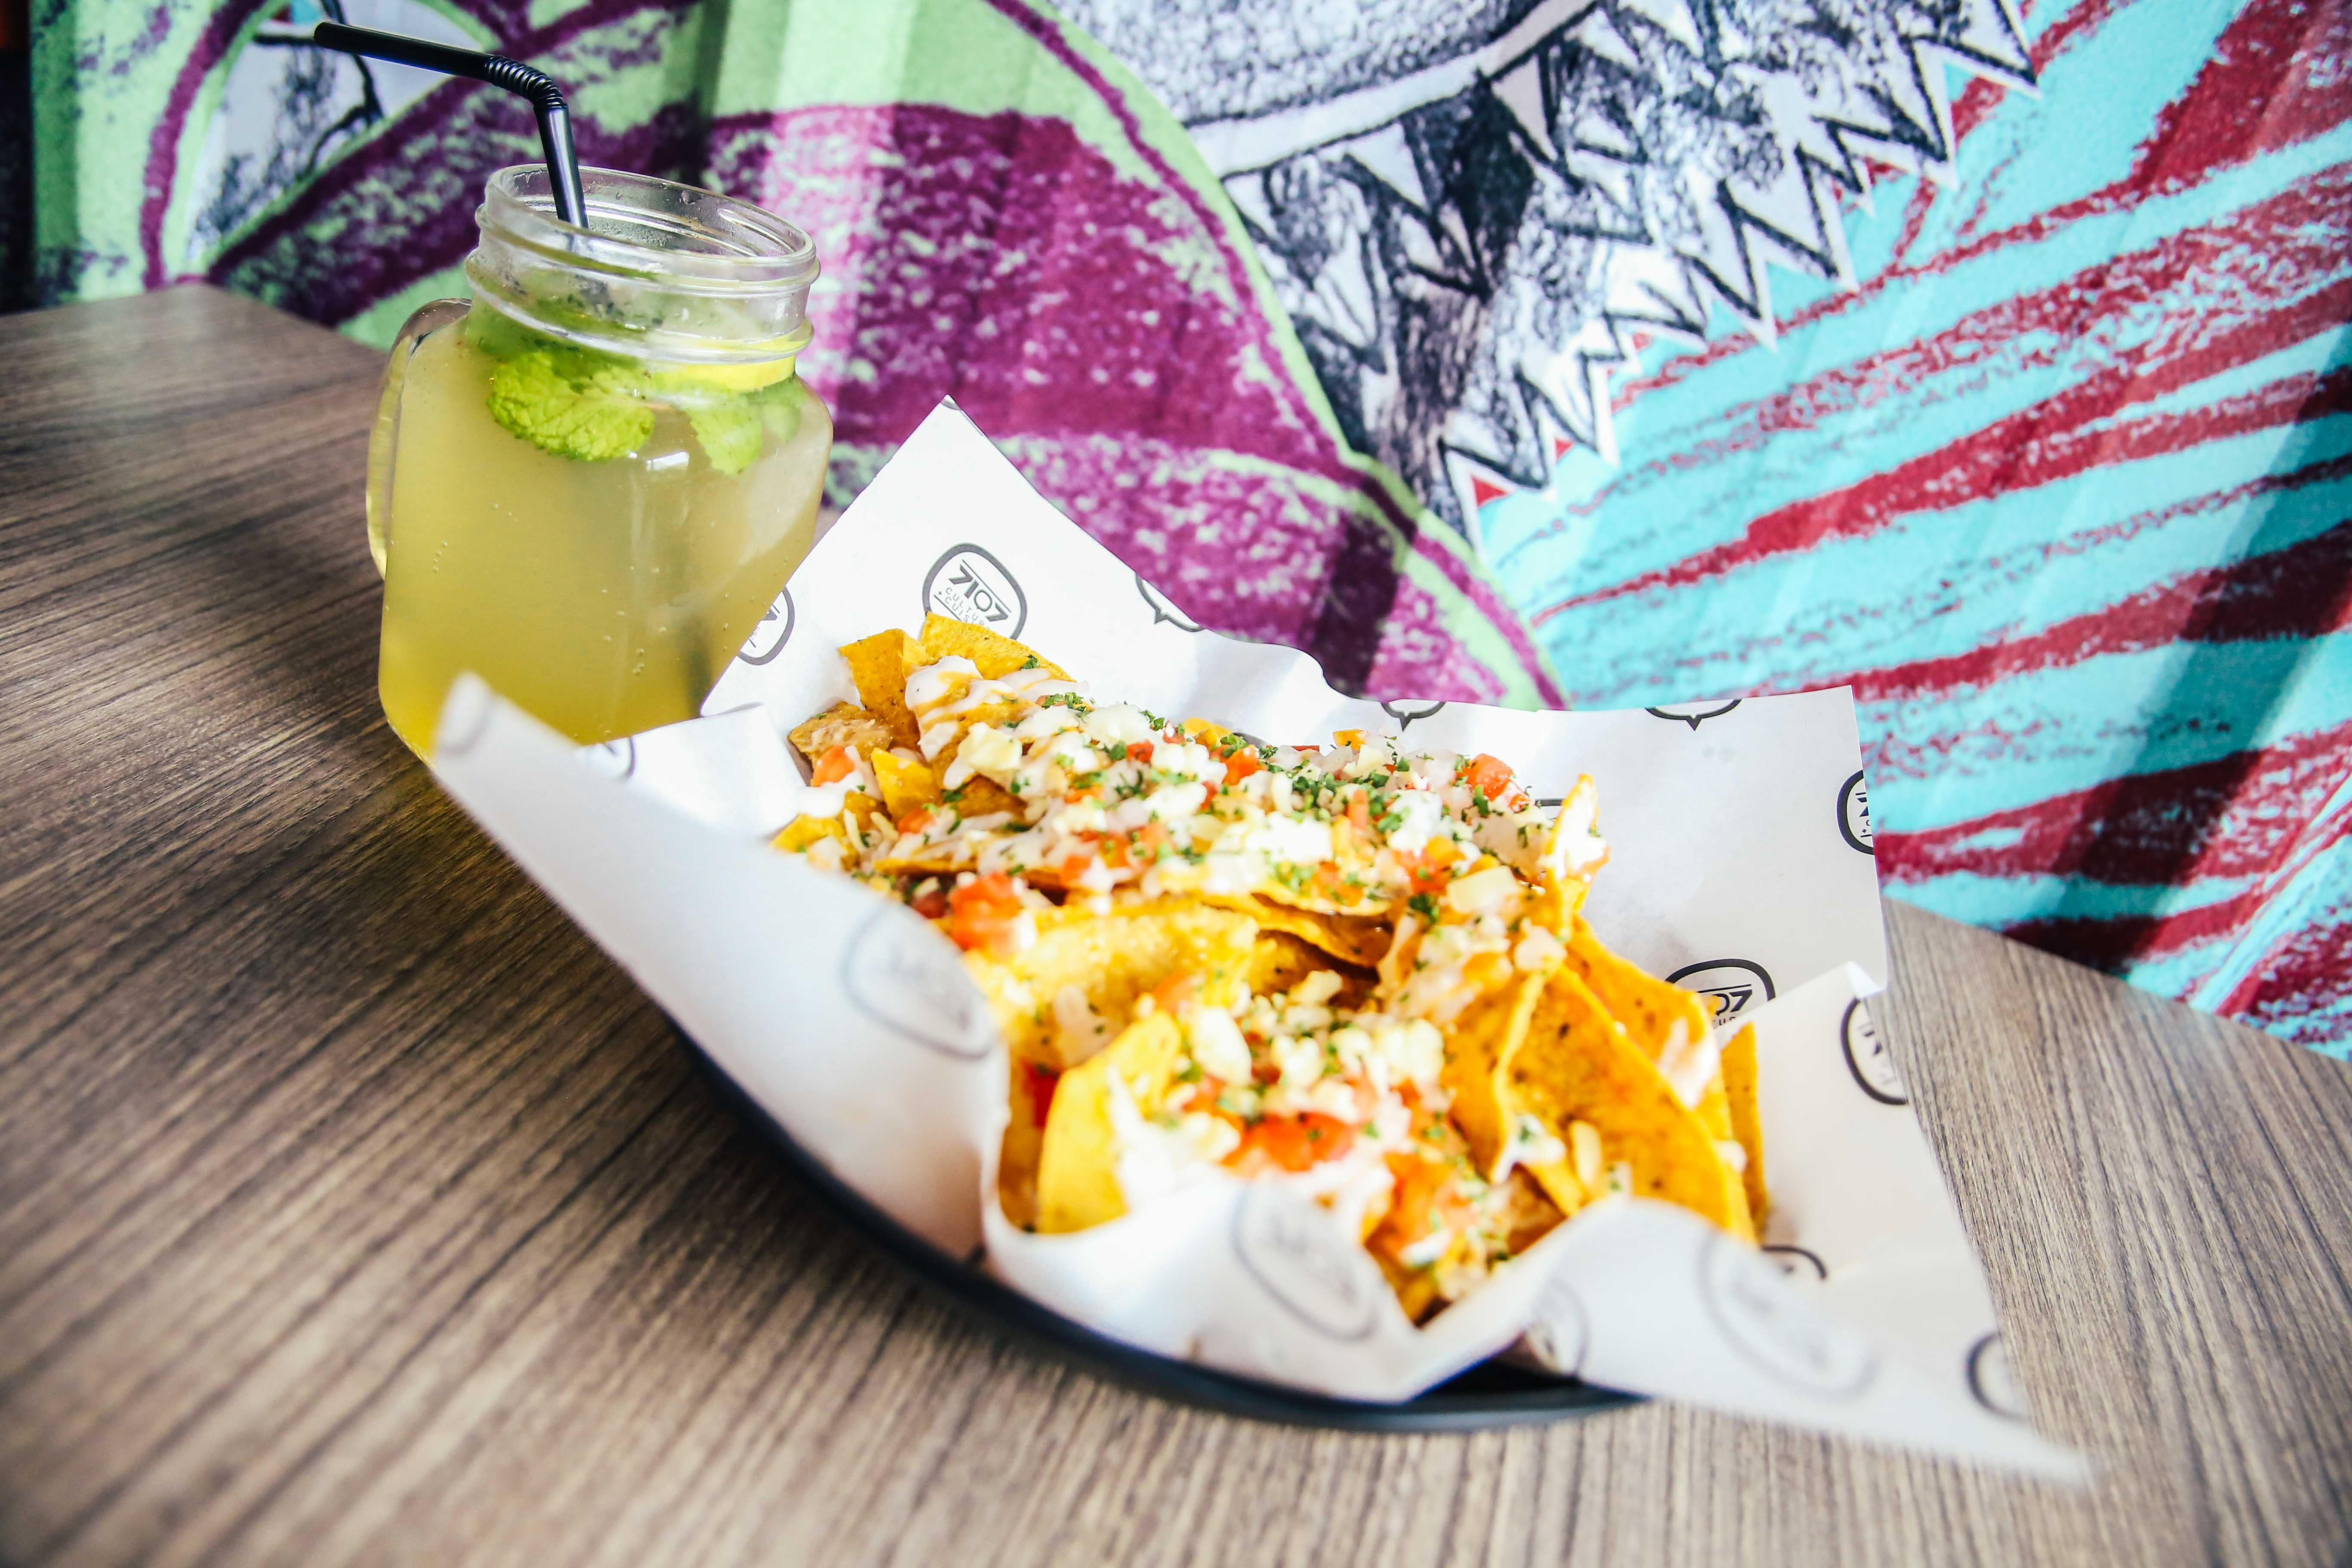 Filipino mojito paired with sisig nachos. Photo by Paolo Abad/Rappler 